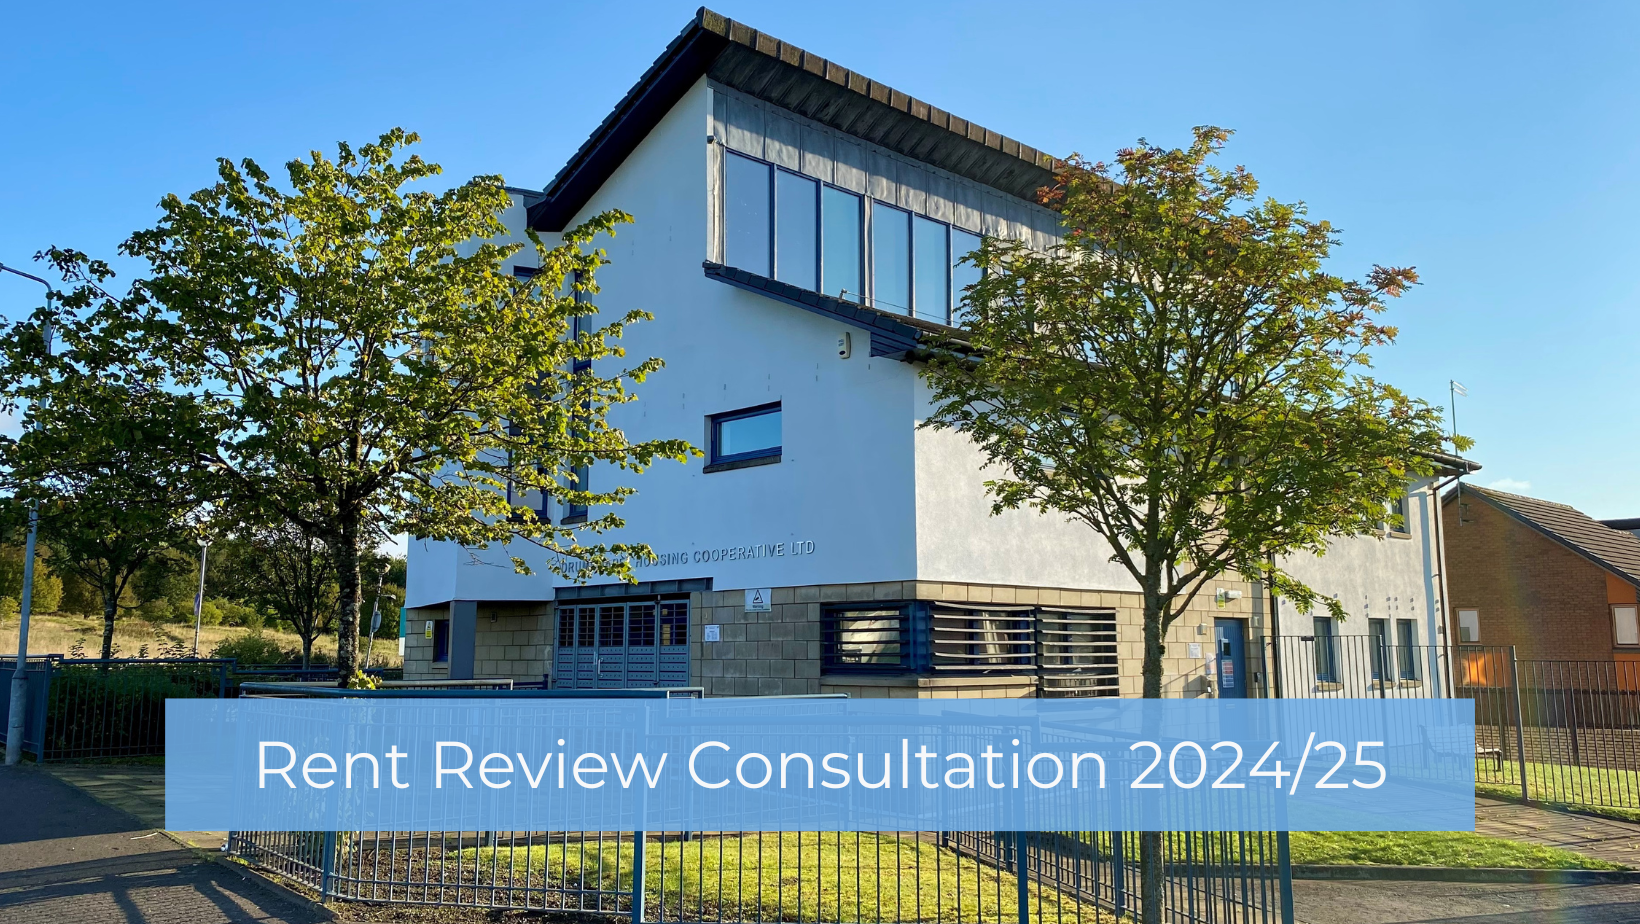 Rent Review Consultation 2024/25